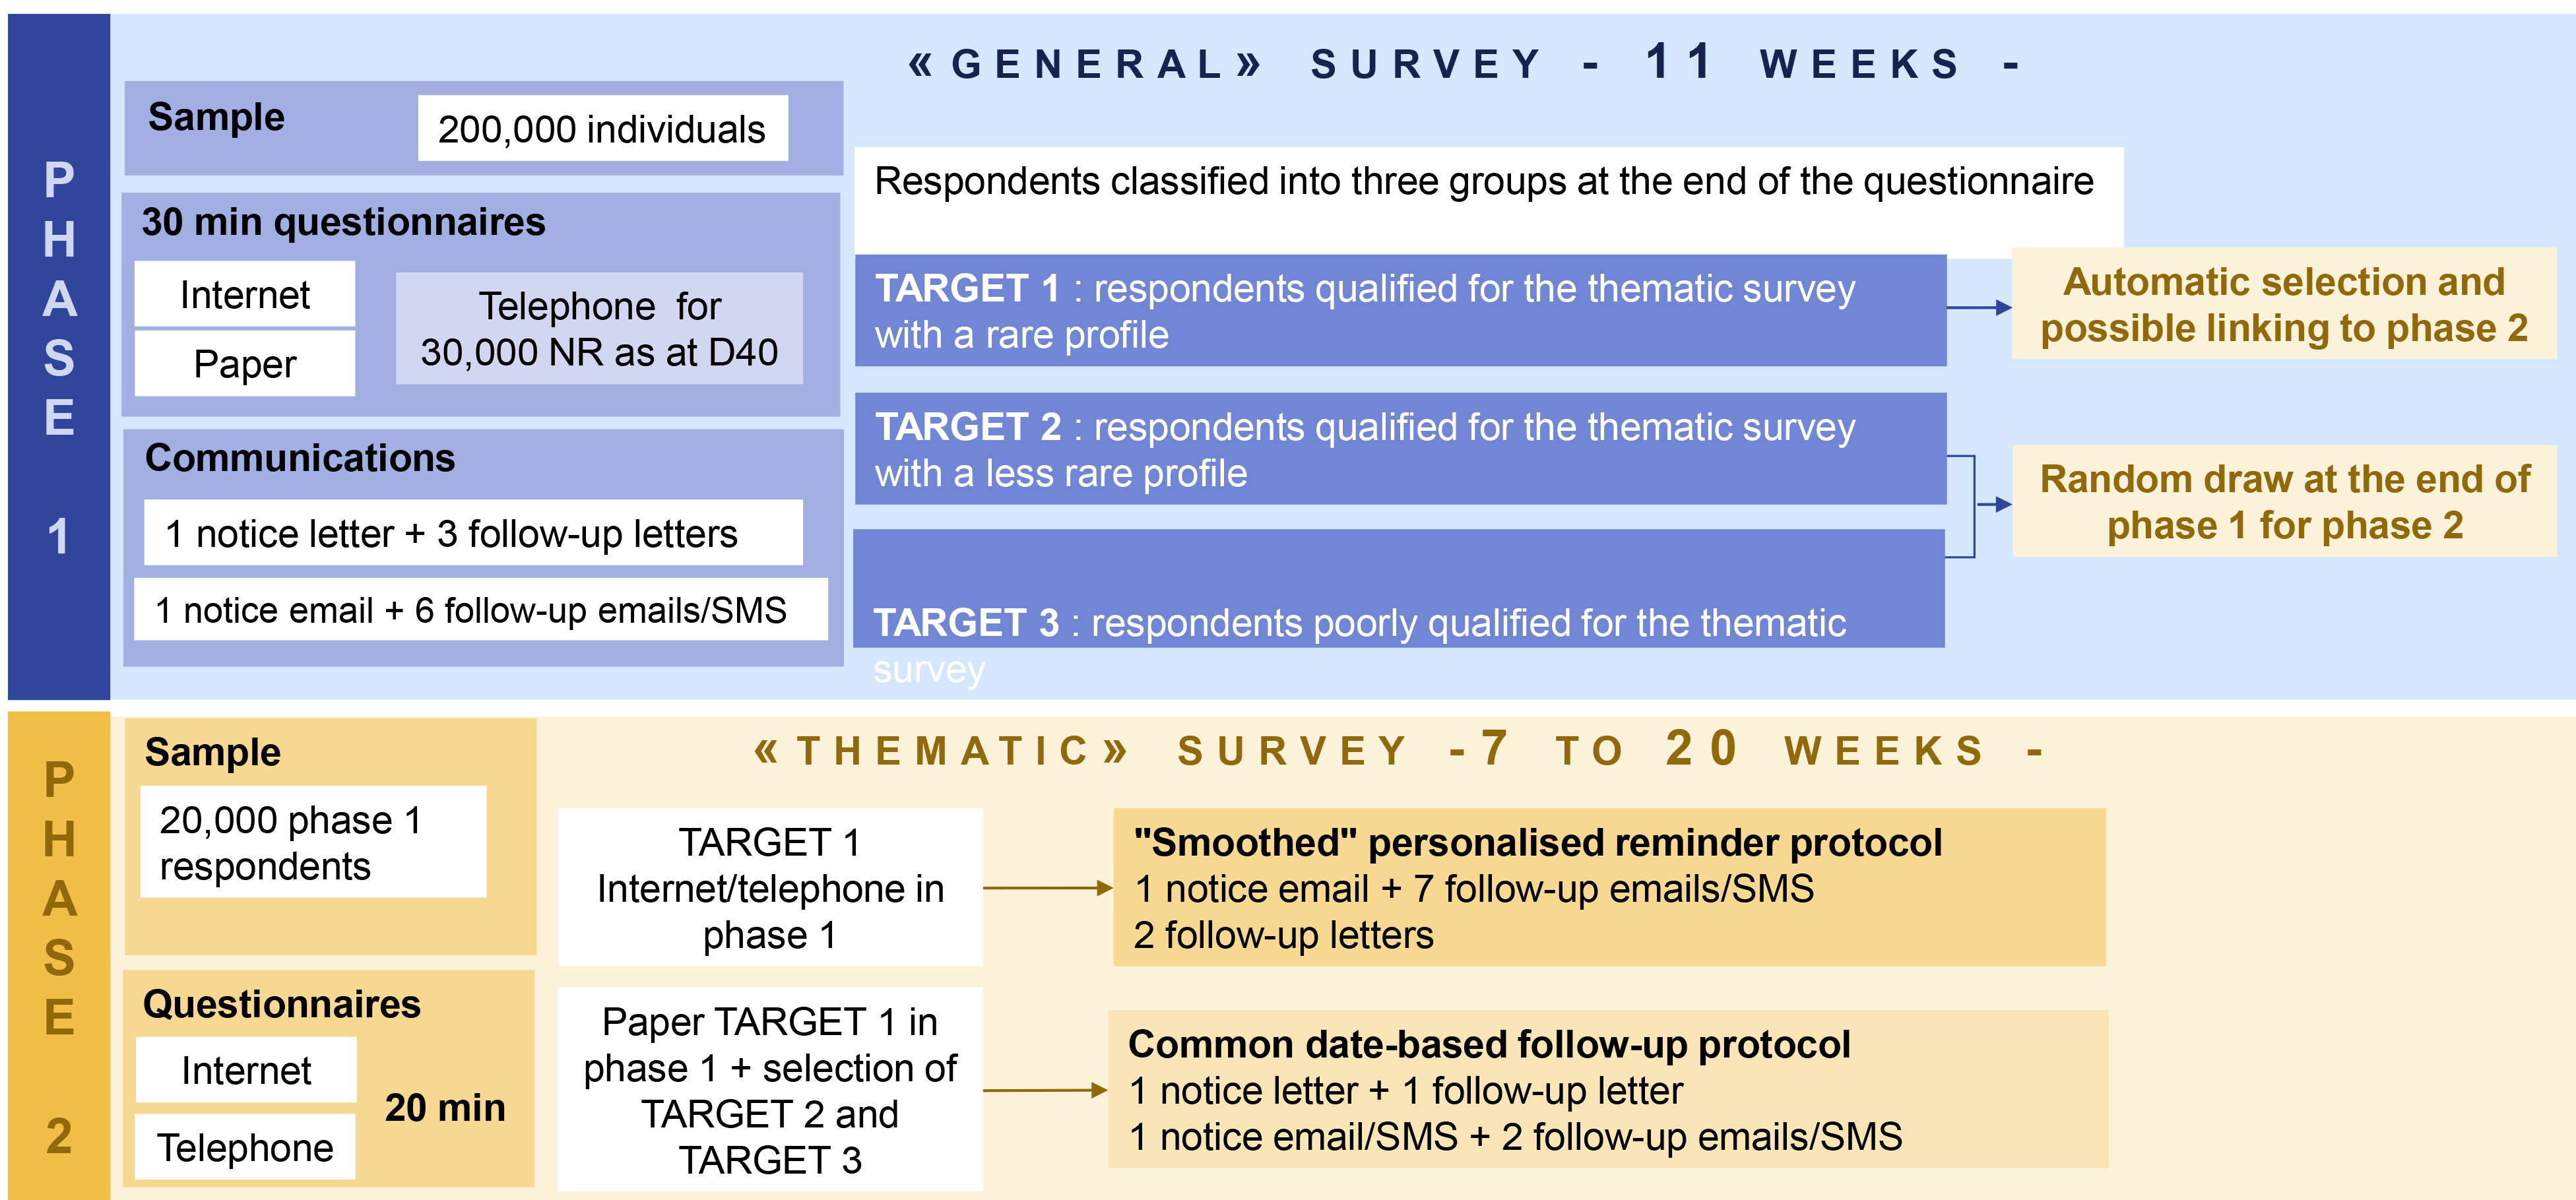 General structure of the new victimisation survey scheme. Definitions: CAWI (Computer-assisted web interviewing) refers to online responses; CATI (Computer-assisted telephone interviewing) refers to telephone responses; NR: non-respondents. Reading note: 30,000 NR as at D40 means that 30,000 individuals who had not responded to the survey after six weeks (D40) were selected at random from among the non-respondents with a mobile or landline telephone number to conduct a telephone interview.